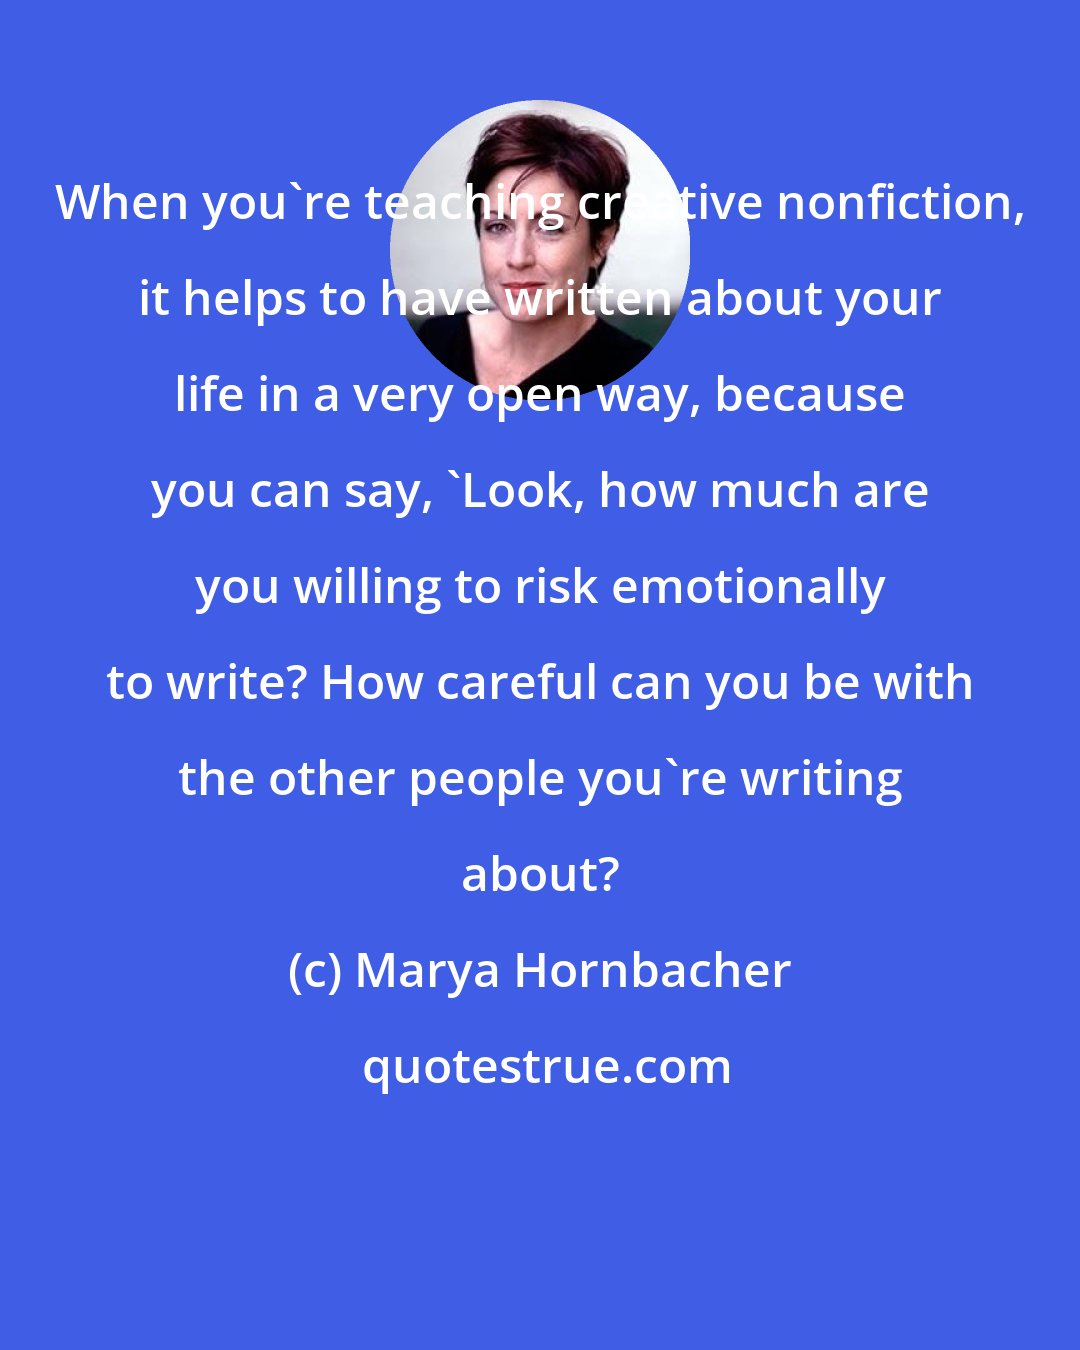 Marya Hornbacher: When you're teaching creative nonfiction, it helps to have written about your life in a very open way, because you can say, 'Look, how much are you willing to risk emotionally to write? How careful can you be with the other people you're writing about?